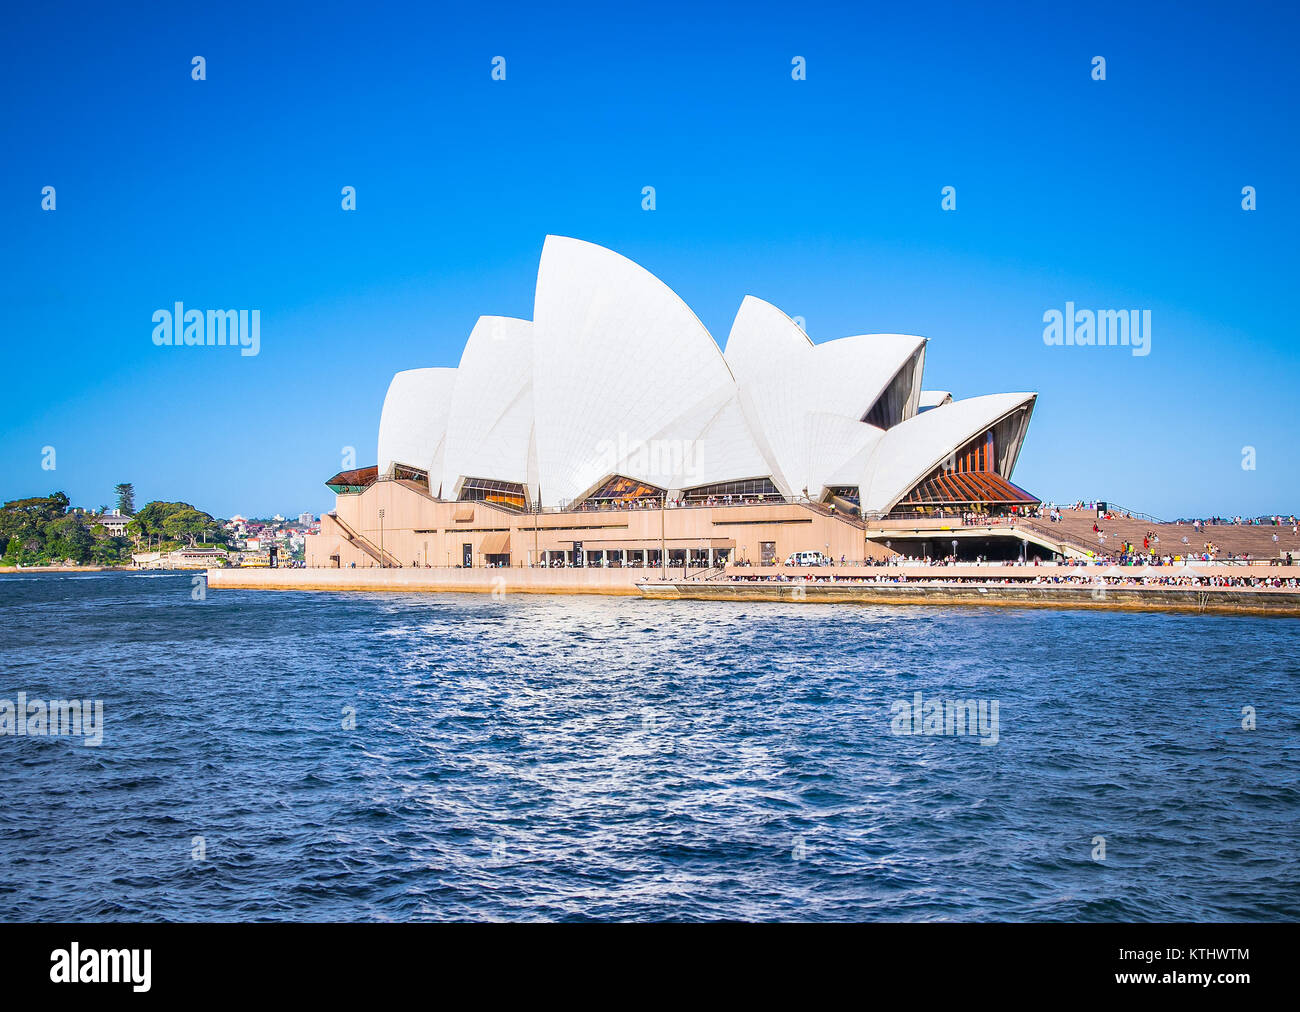 SYDNEY, AUSTRALIA - DECEMBER 21, 2014: The Iconic Sydney Opera House is a multi-venue performing arts centre also containing bars and outdoor restaura Stock Photo